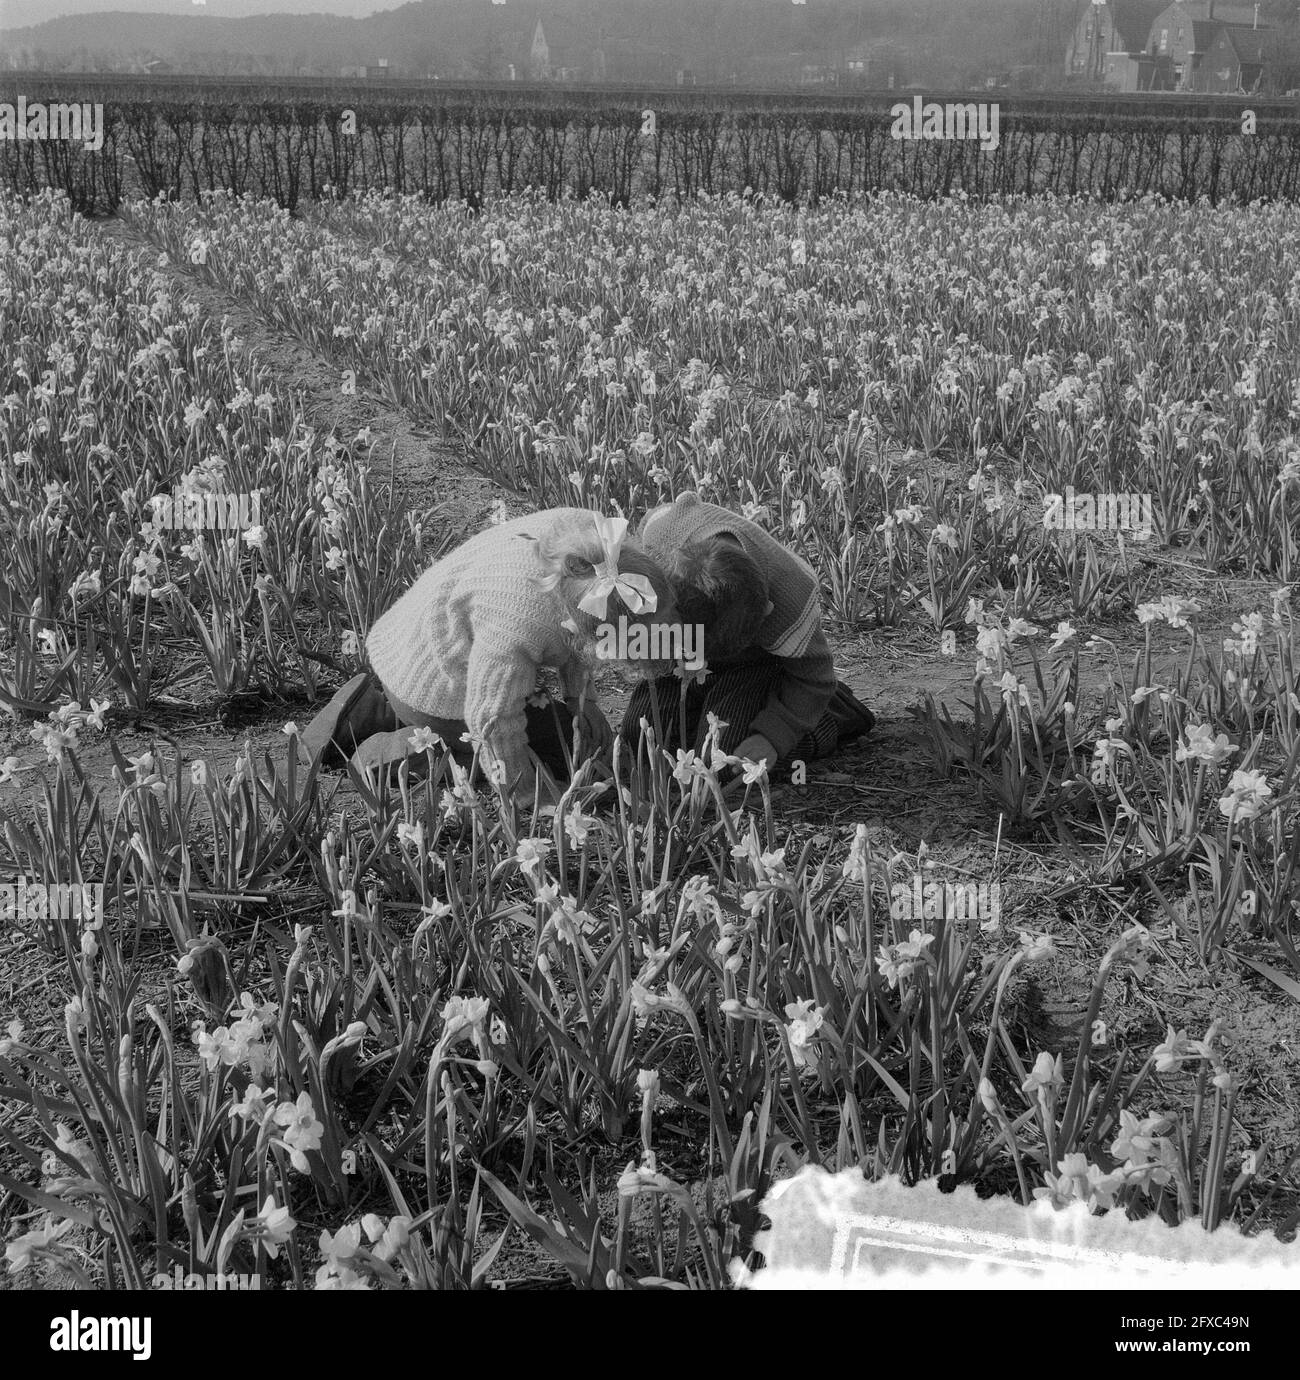 Children in daffodil fields near Noordwijk and Lisse, March 12, 1957, flowers, children, The Netherlands, 20th century press agency photo, news to remember, documentary, historic photography 1945-1990, visual stories, human history of the Twentieth Century, capturing moments in time Stock Photo